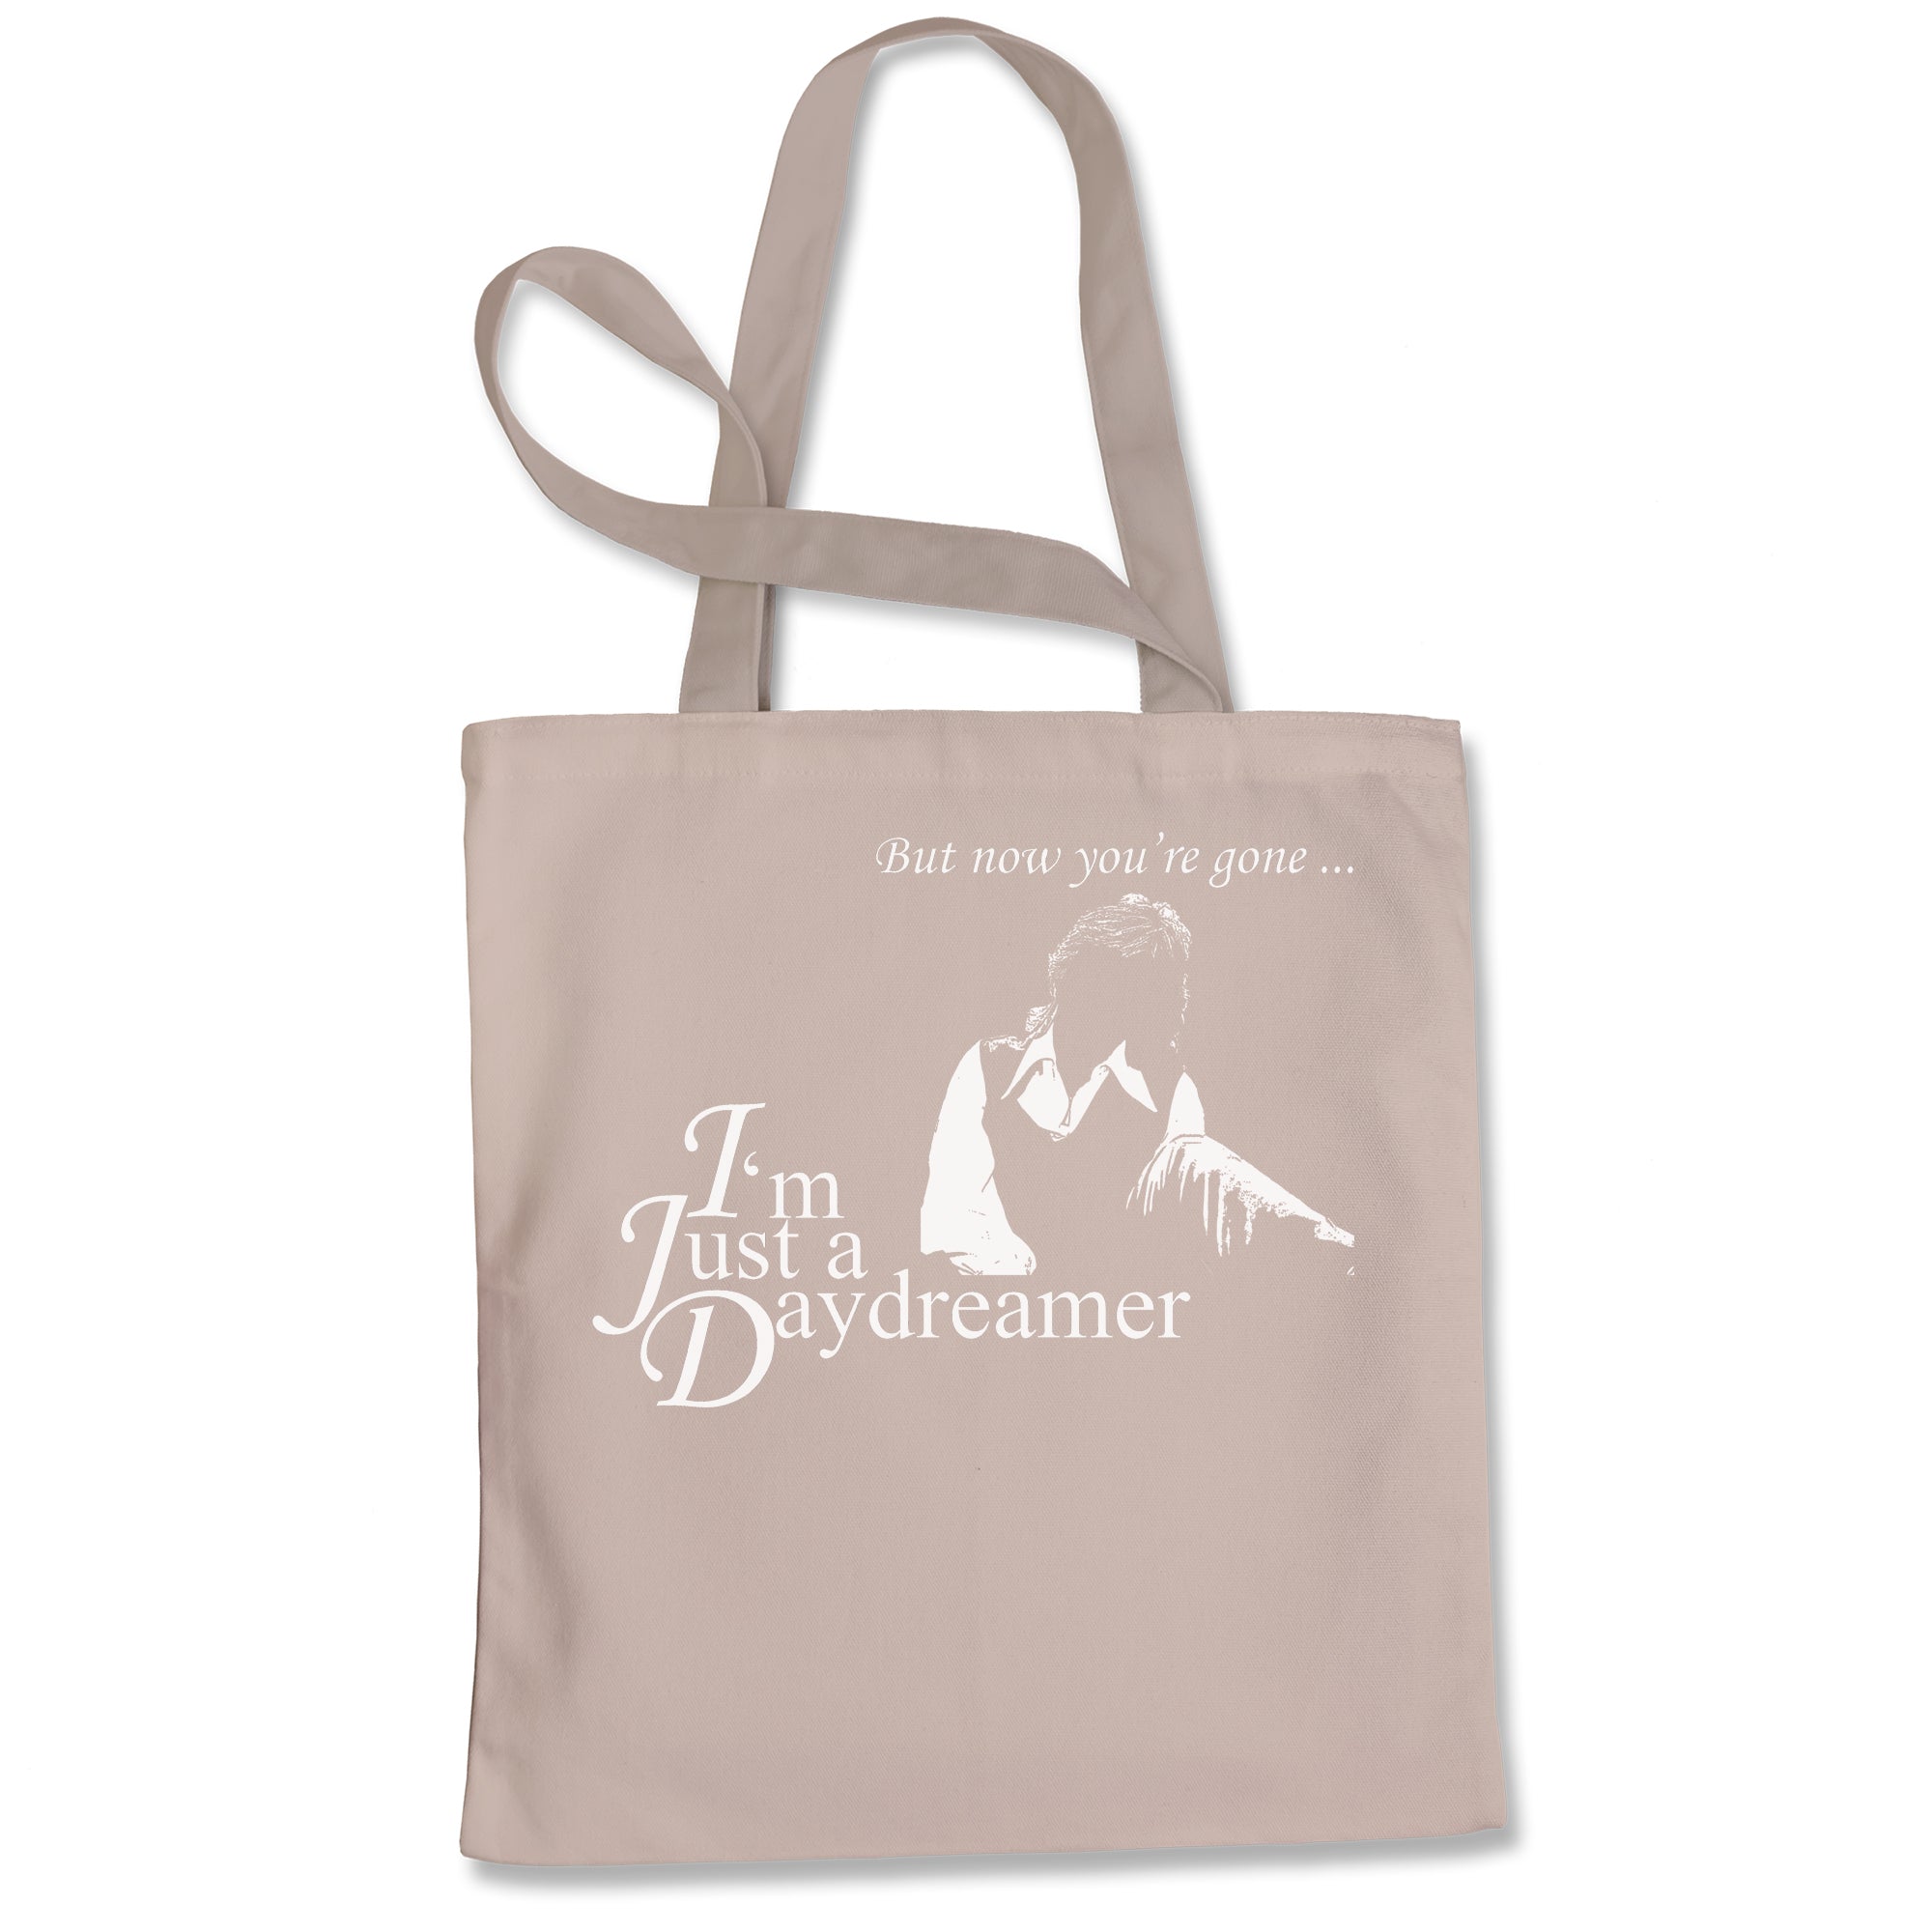 Cassidy Daydreamer Tribute Tote Bag